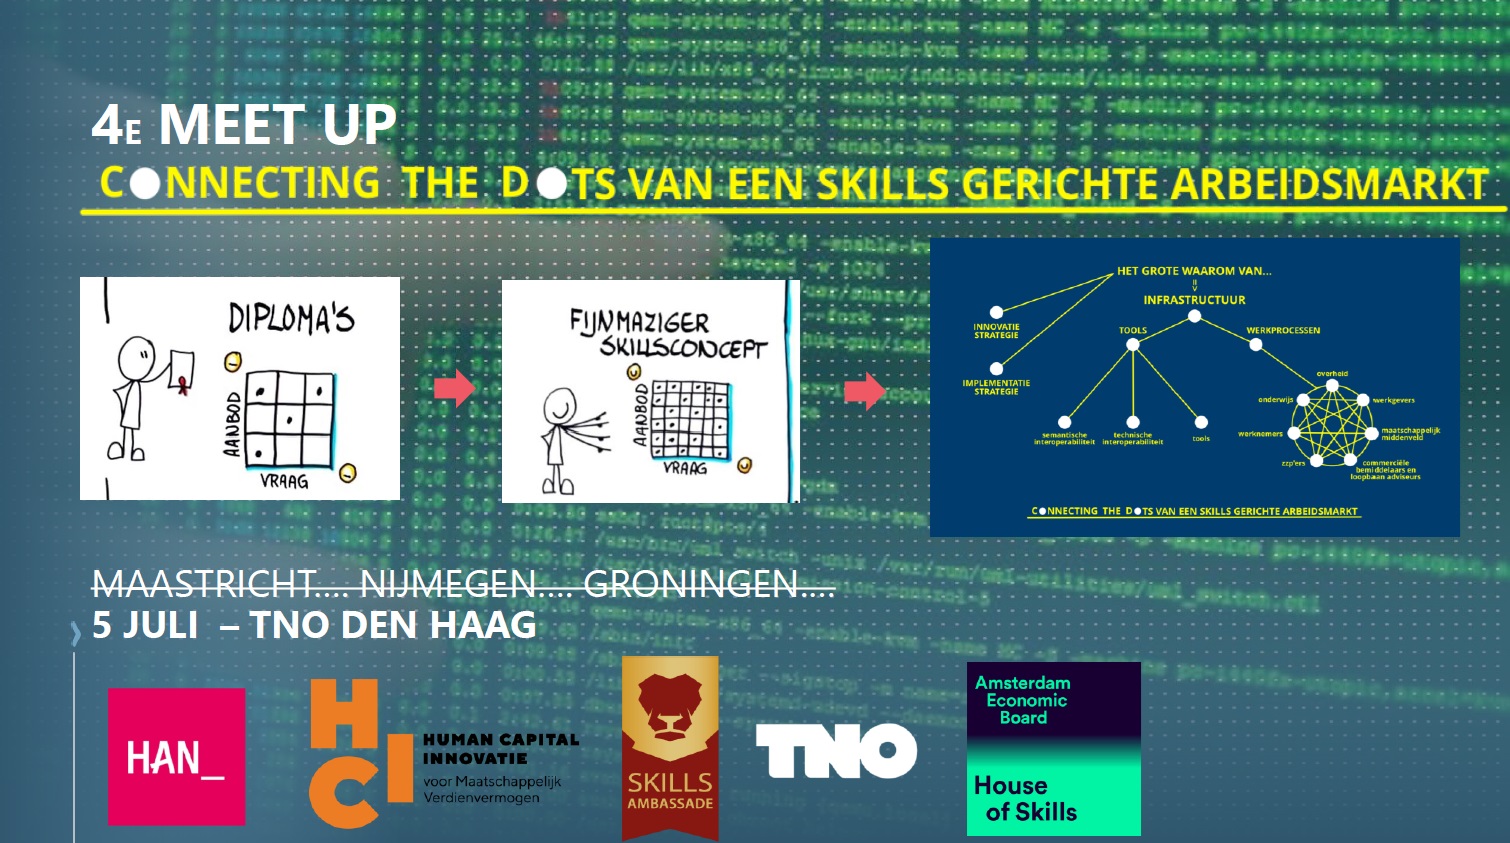 4e Meet-Up ‘Connecting the Dots’ in Den Haag